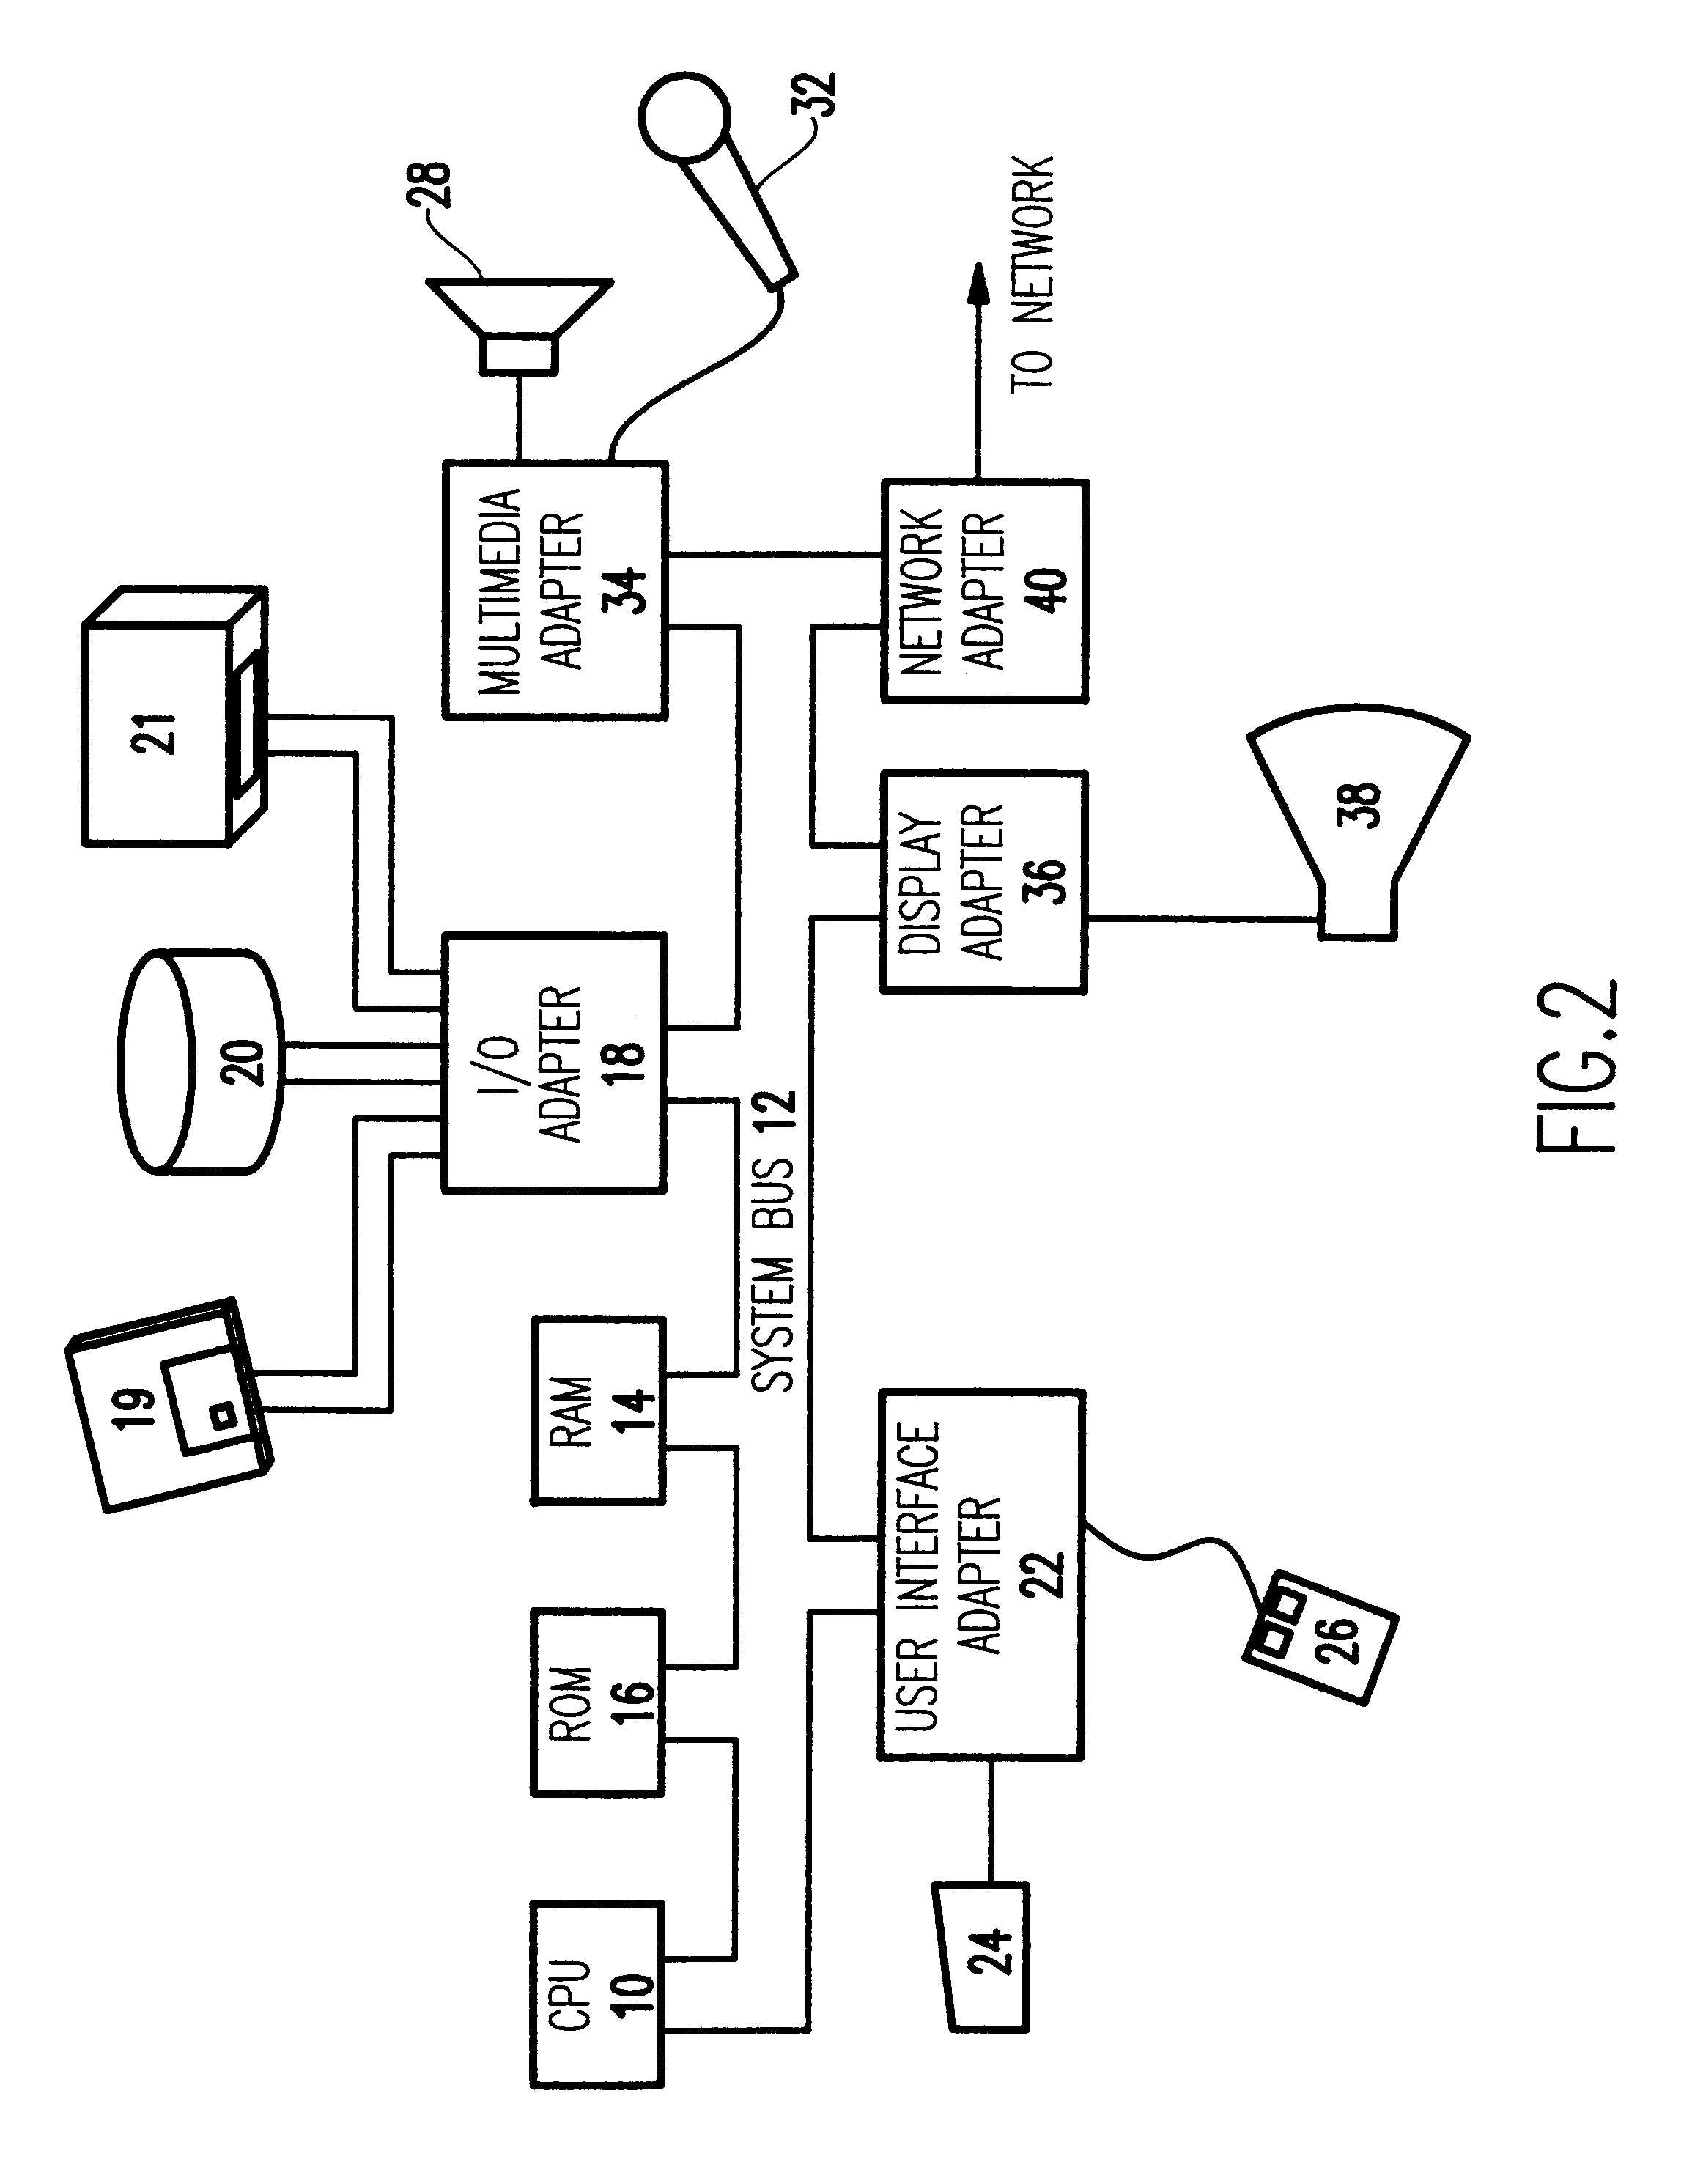 Method and apparatus for delivering multimedia content based on network connections